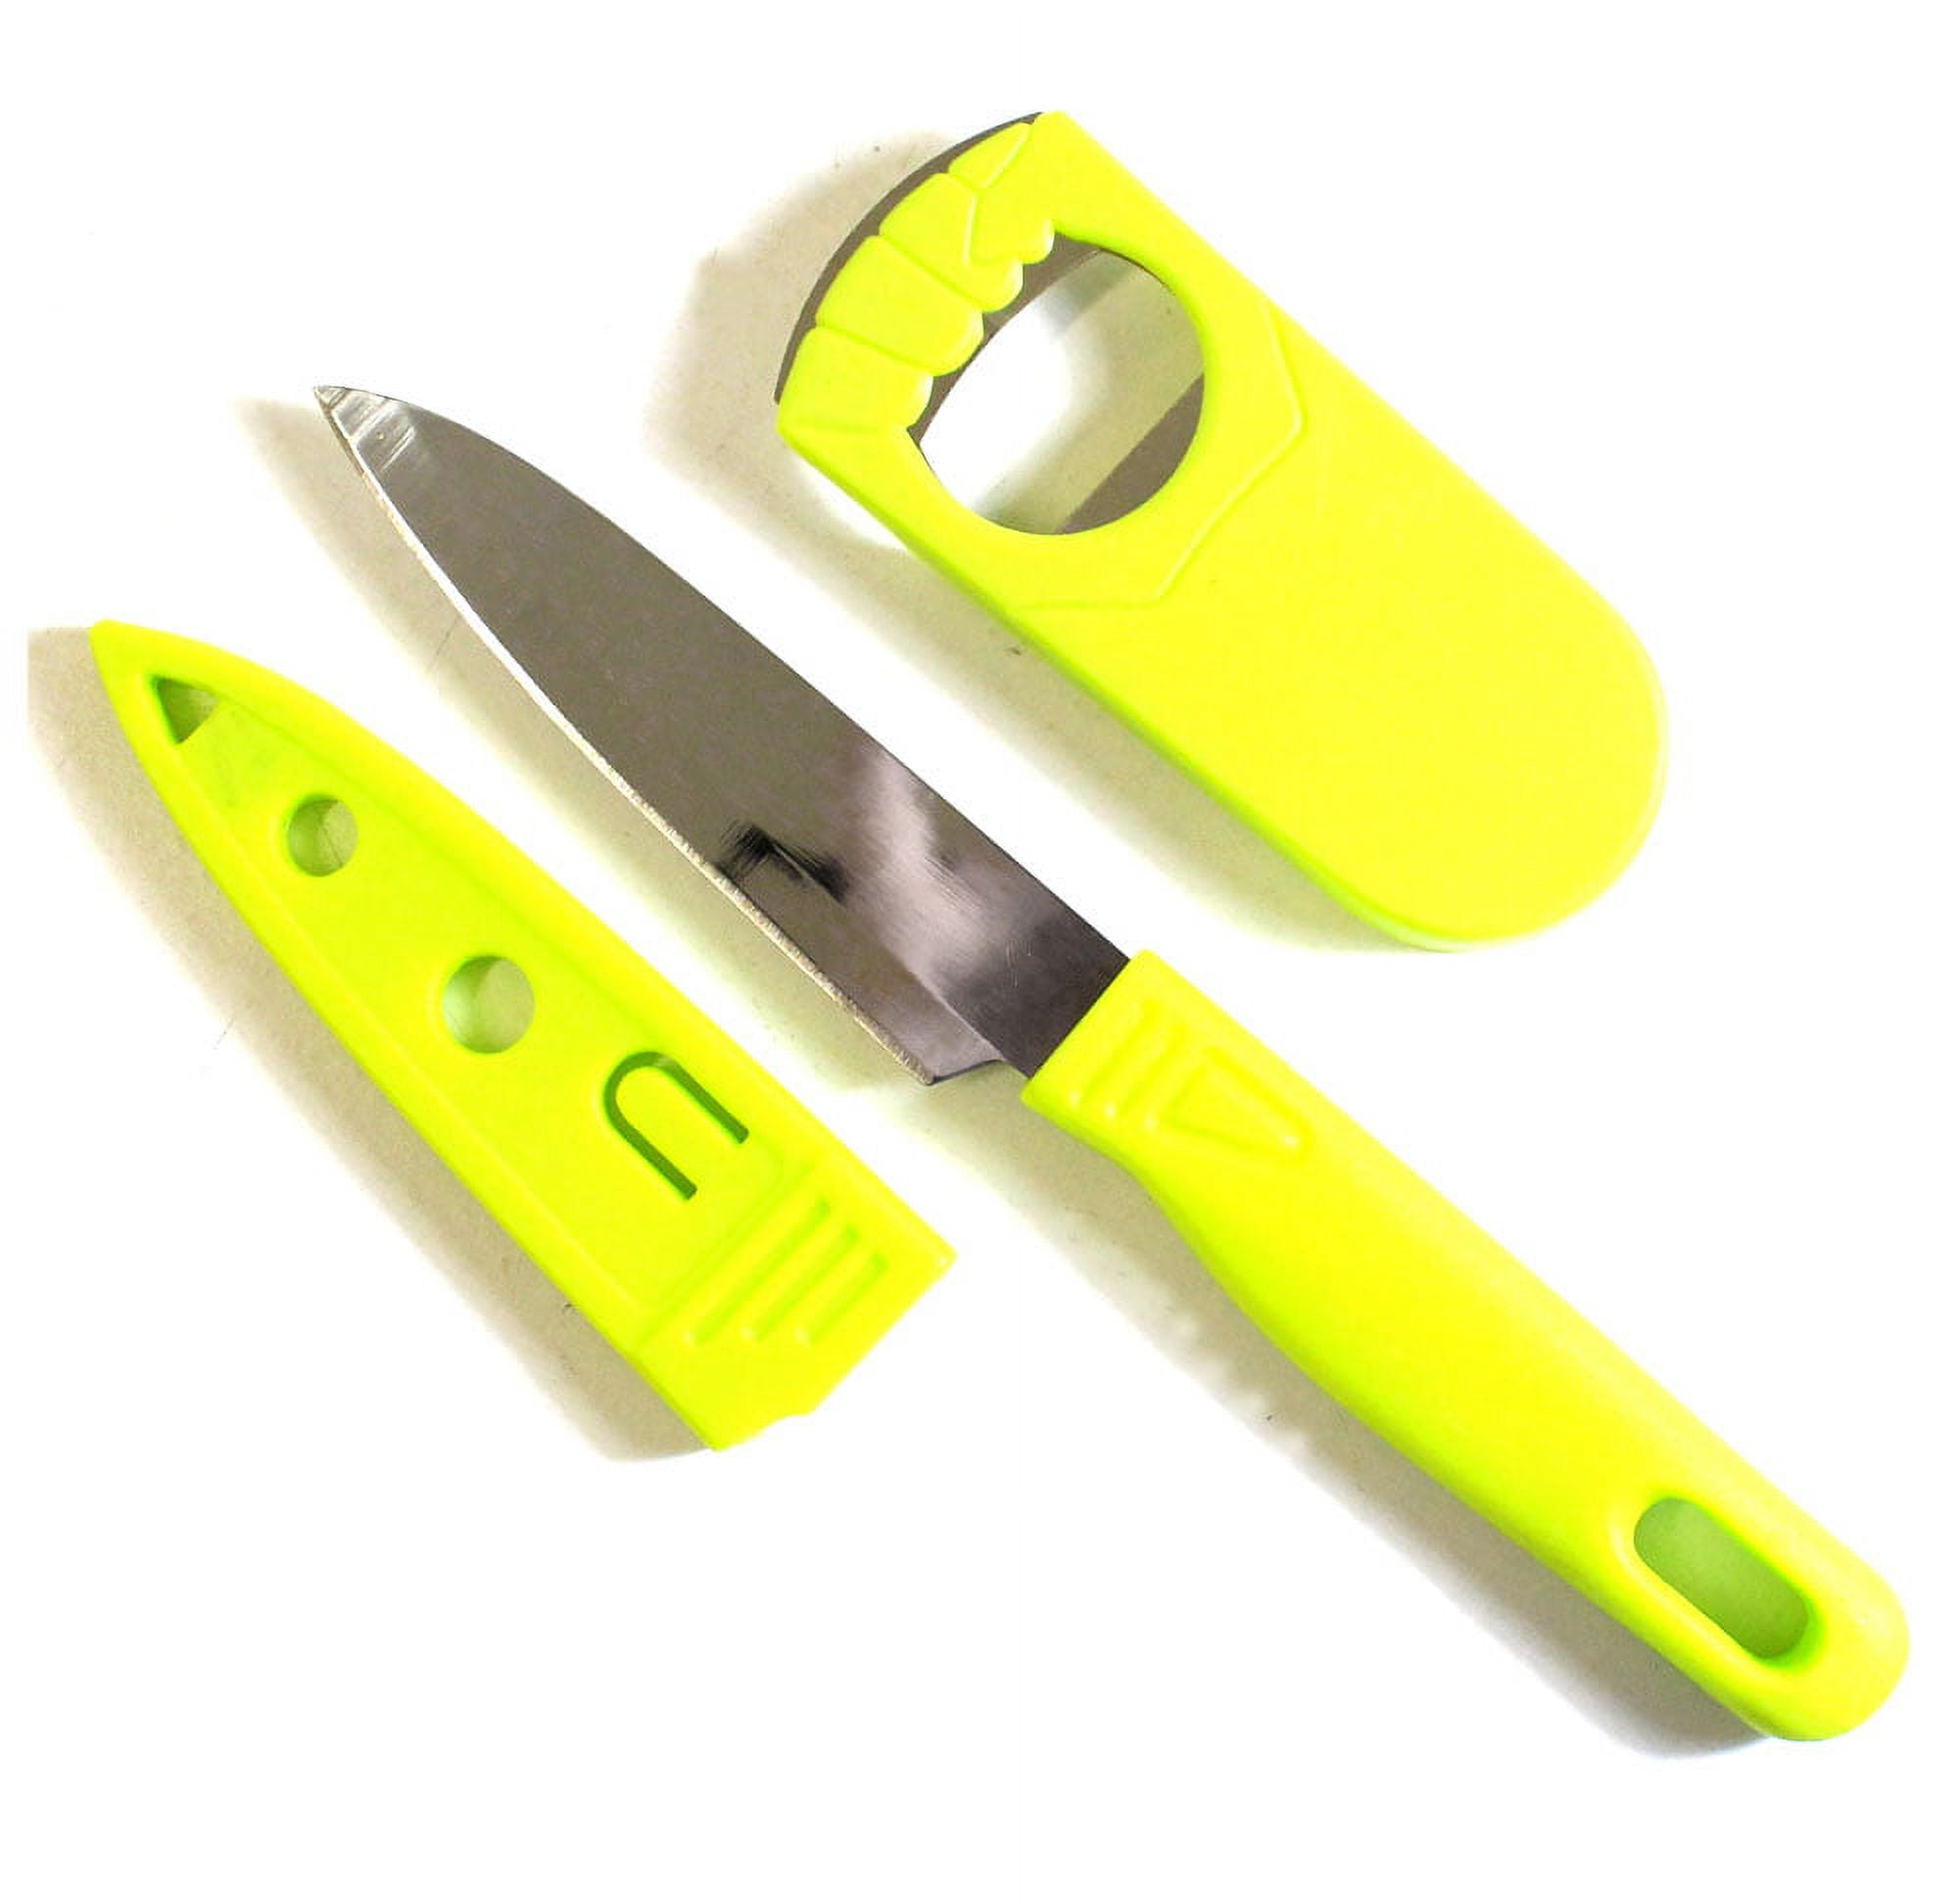 Lime Green Kitchen Accessories: Gadgets, Linens & More!